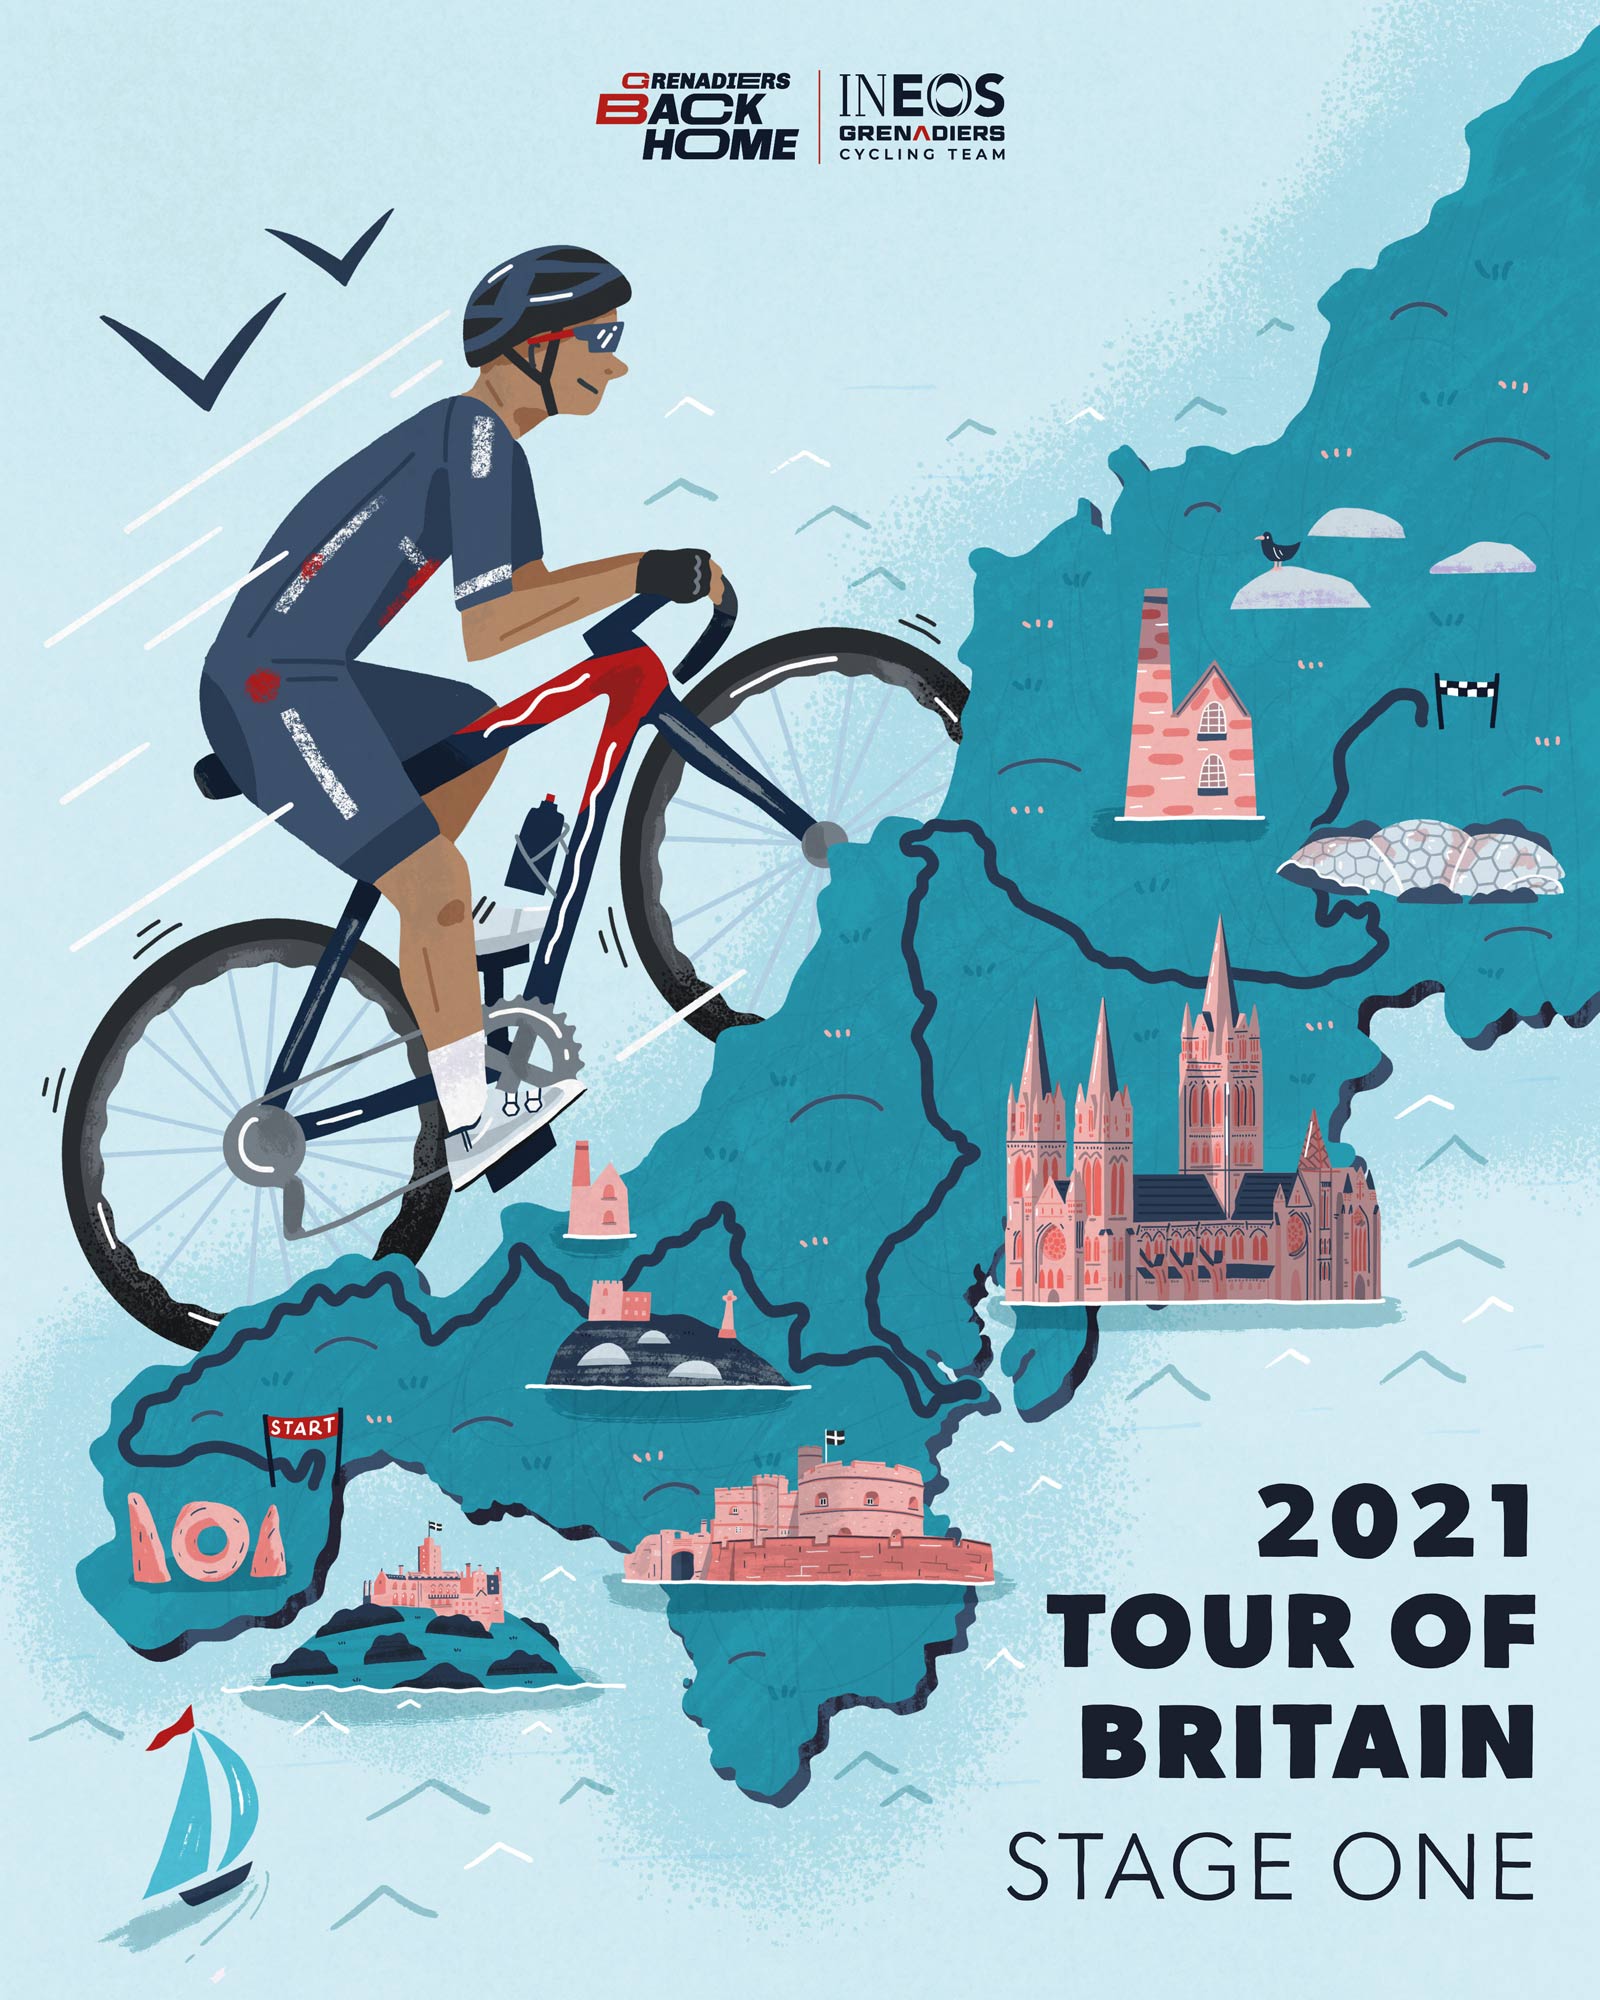 Tour of Britain poster for Ineos Grenadiers by Elly Jahnz